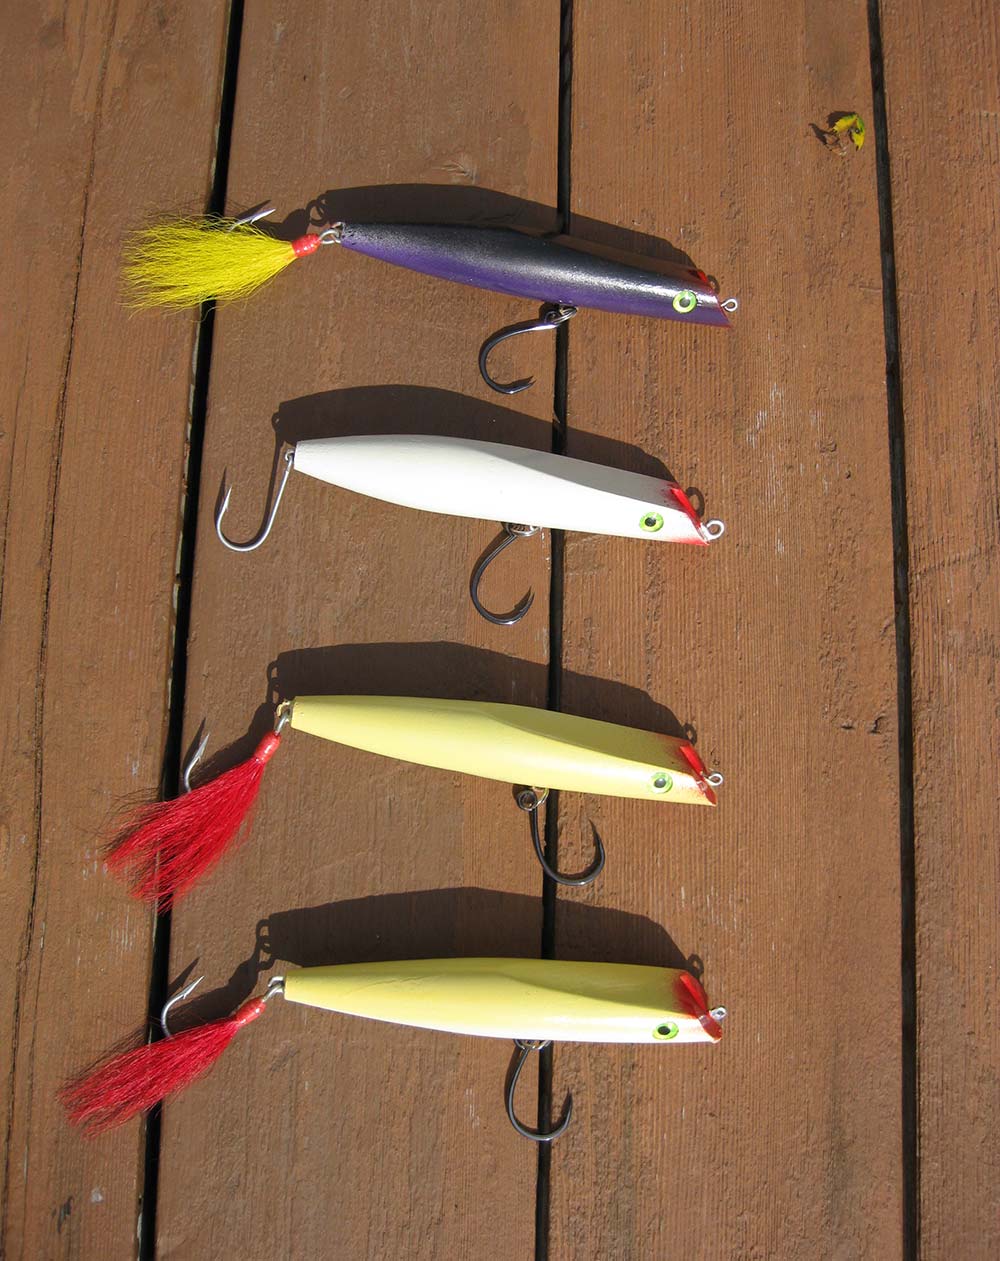 Pike and musky lures handcrafted from cedar